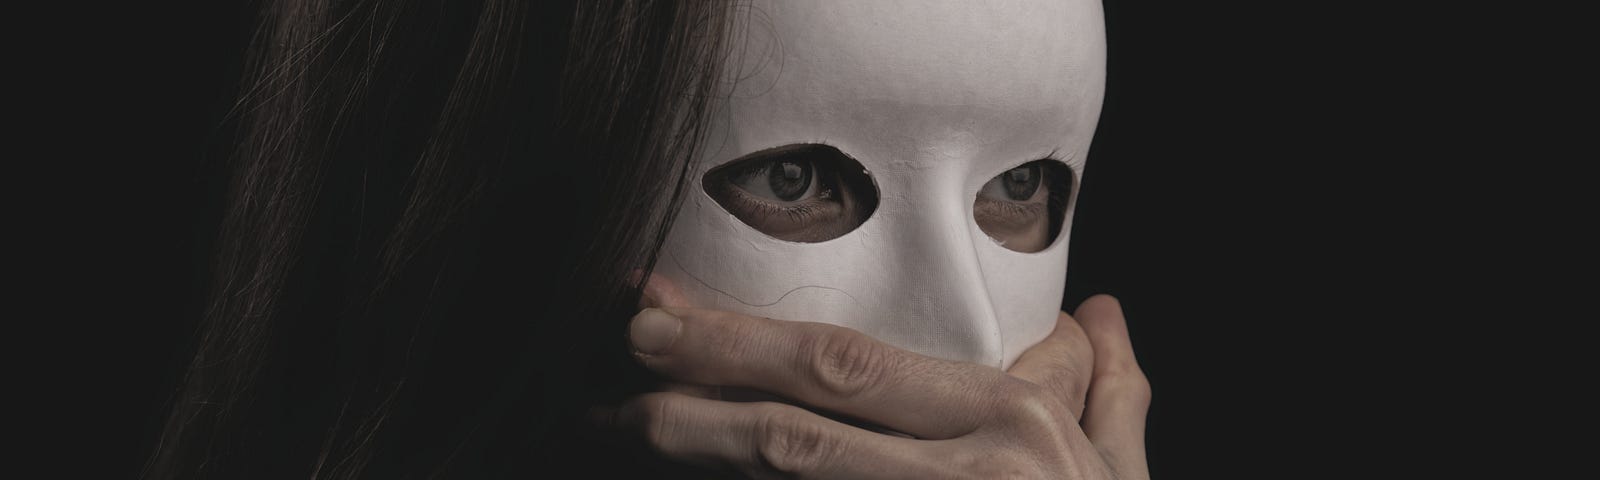 A young brunette woman with long hair is wearing a white cardboard mask, hiding her entire face. But her eyes show through cut out eye holes. They are staring widely at something off-camera. Two unidentifiable hands are grasping where her mouth ought to be, stopping her from speaking. Allodoxaphobia: the fear of hearing others’ opinions. My phobia stopped me from speaking out against child abuse. I was unable to confront an abusive parent in public. What would you have done in my situation?